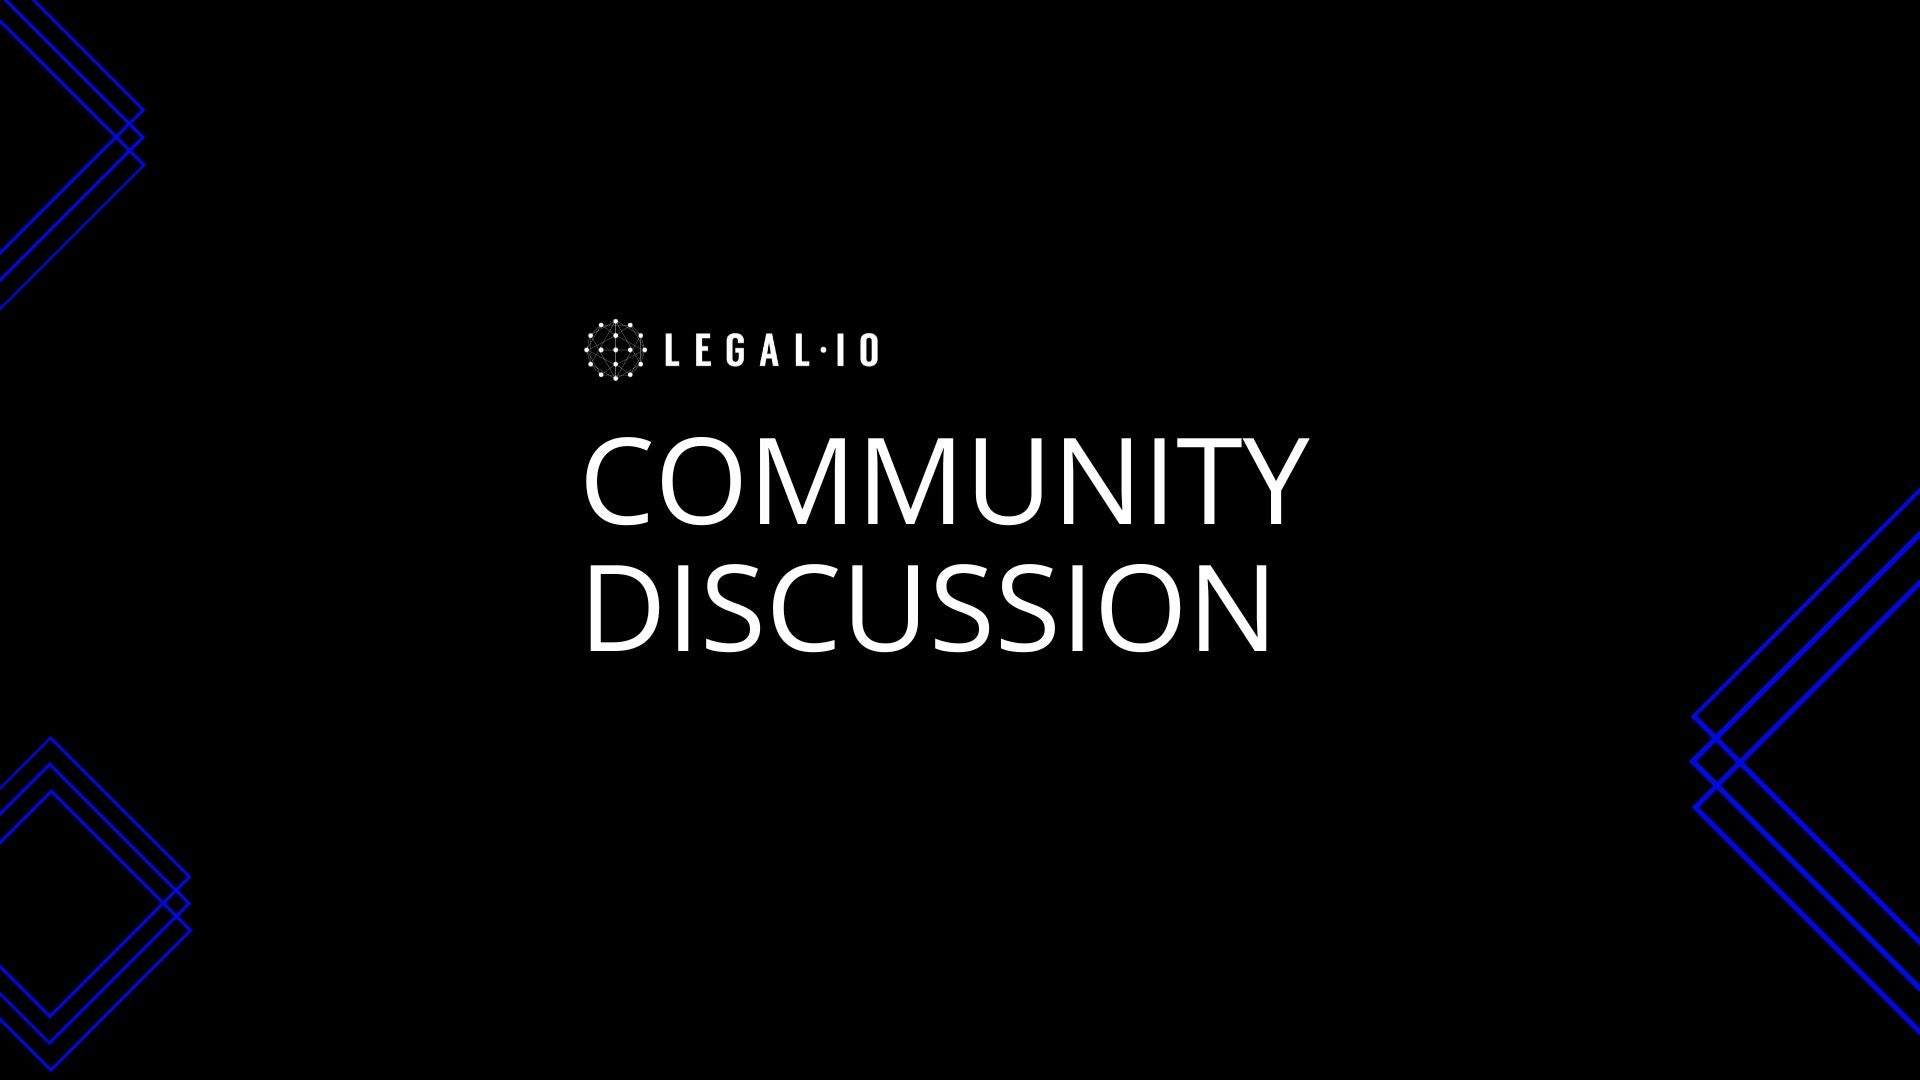 Community Discussion: What procedures and strategies does your legal operations team have in place for responding to regulatory investigations or inquiries?